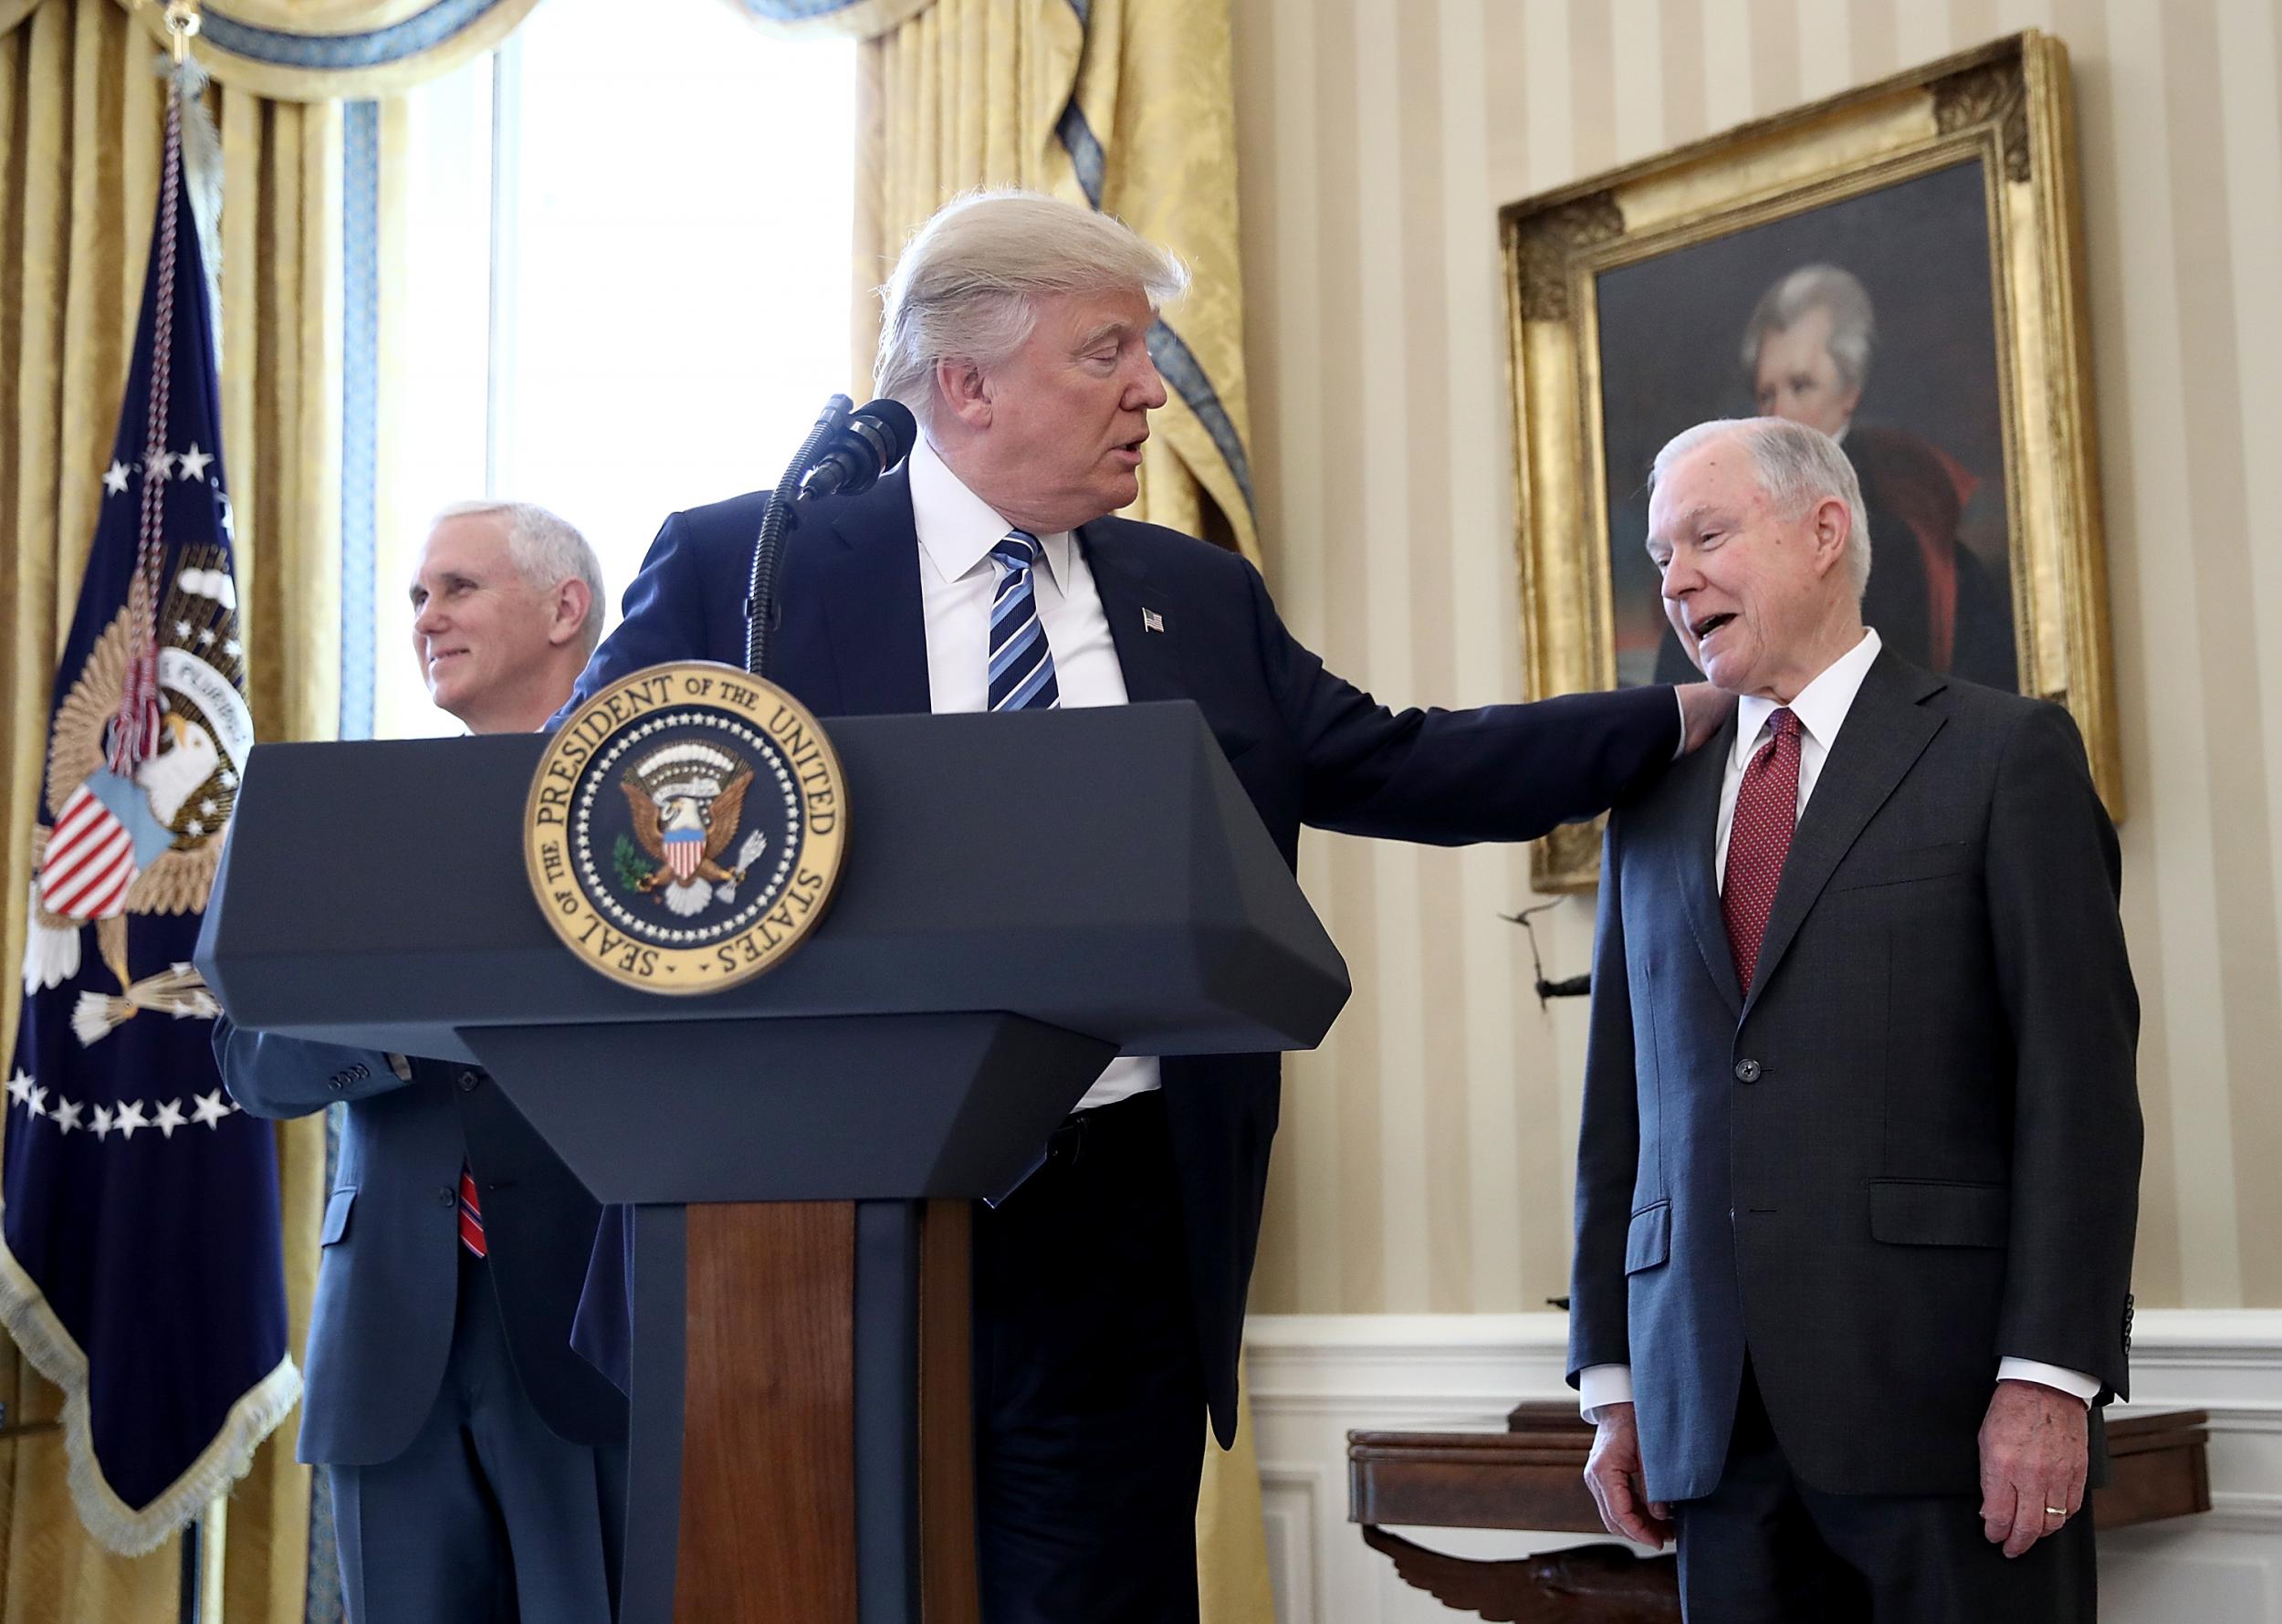 Donald Trump with Jeff Sessions before the US Attorney General’s swearing in ceremony last month